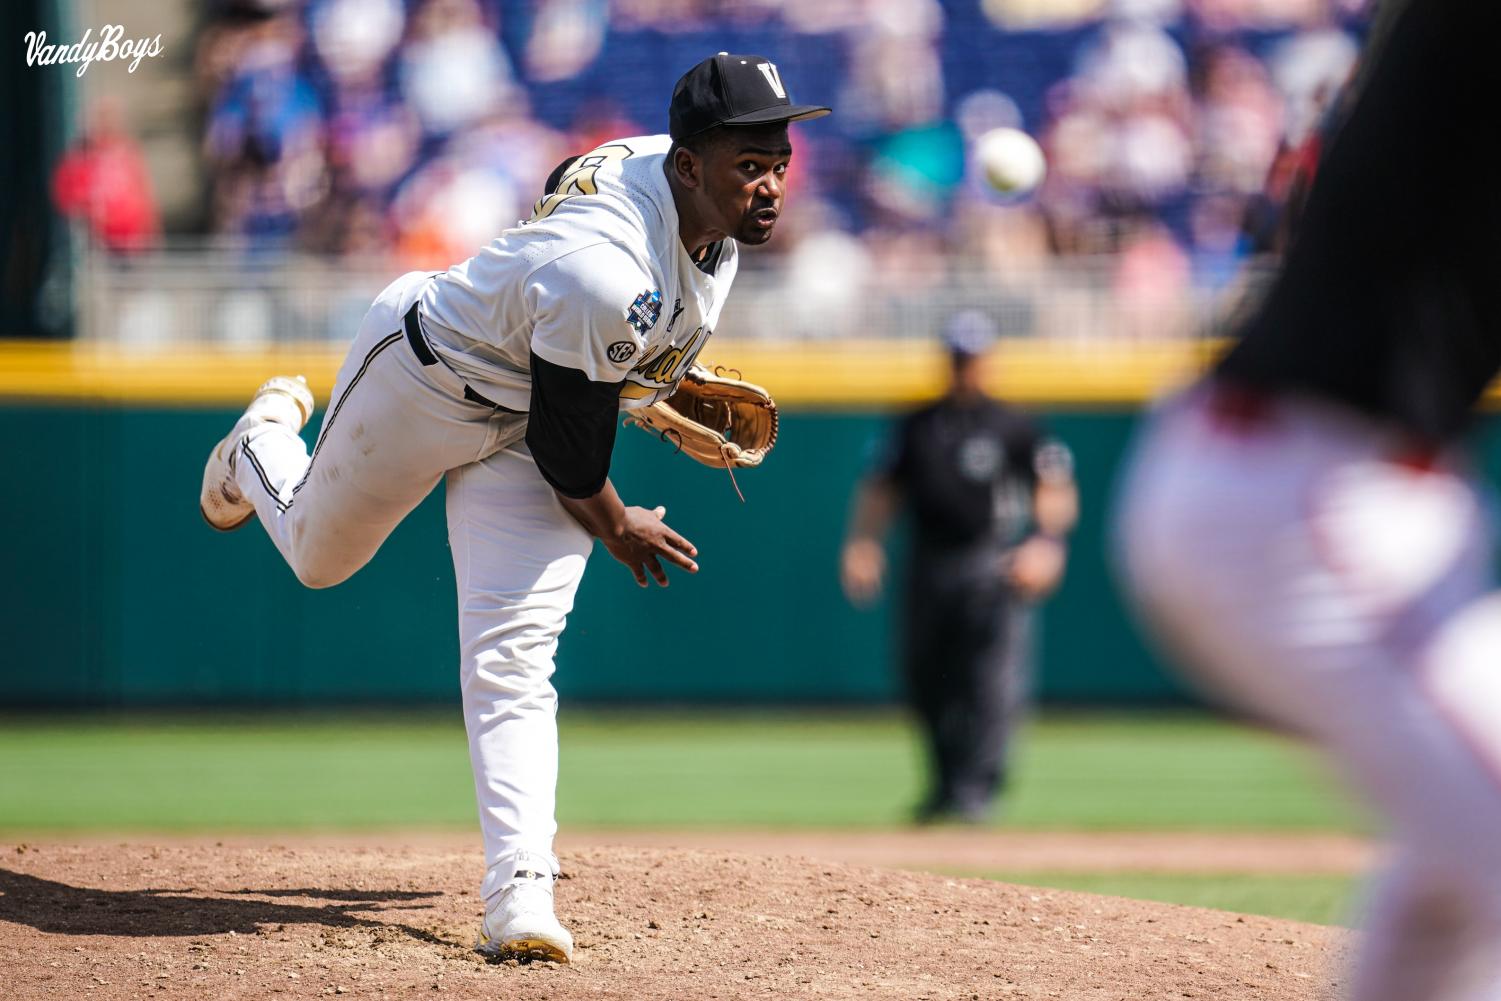 Chris McElvain: A look at the Vandy baseball right-handed pitcher